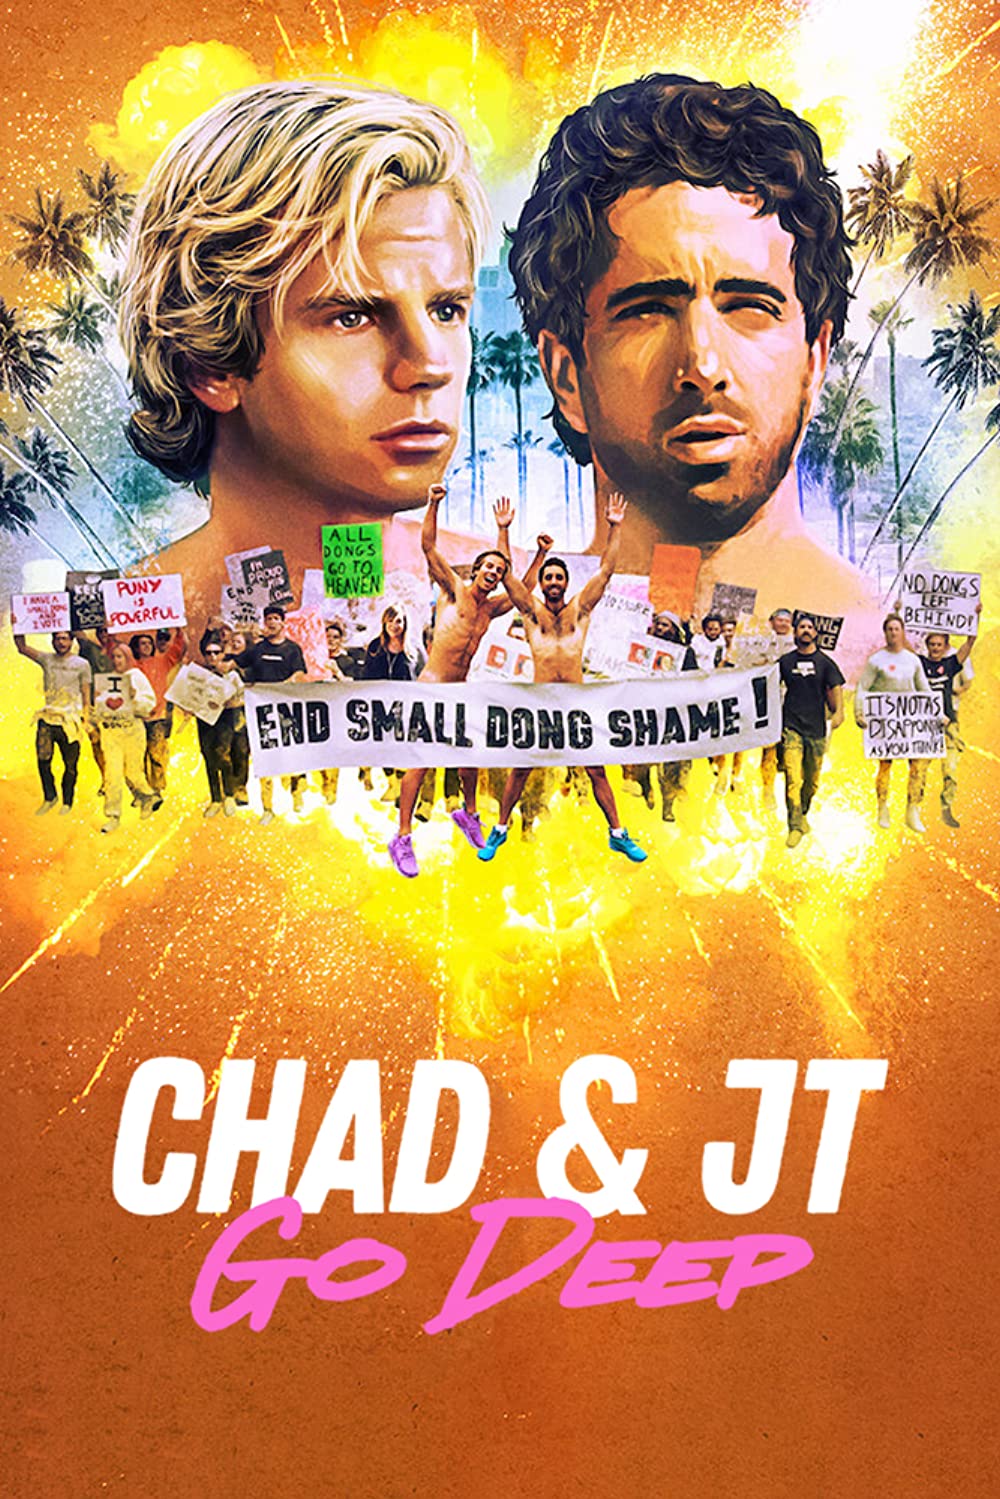 Chad and JT Go Deep Season 1 (Complete) [TV Series]